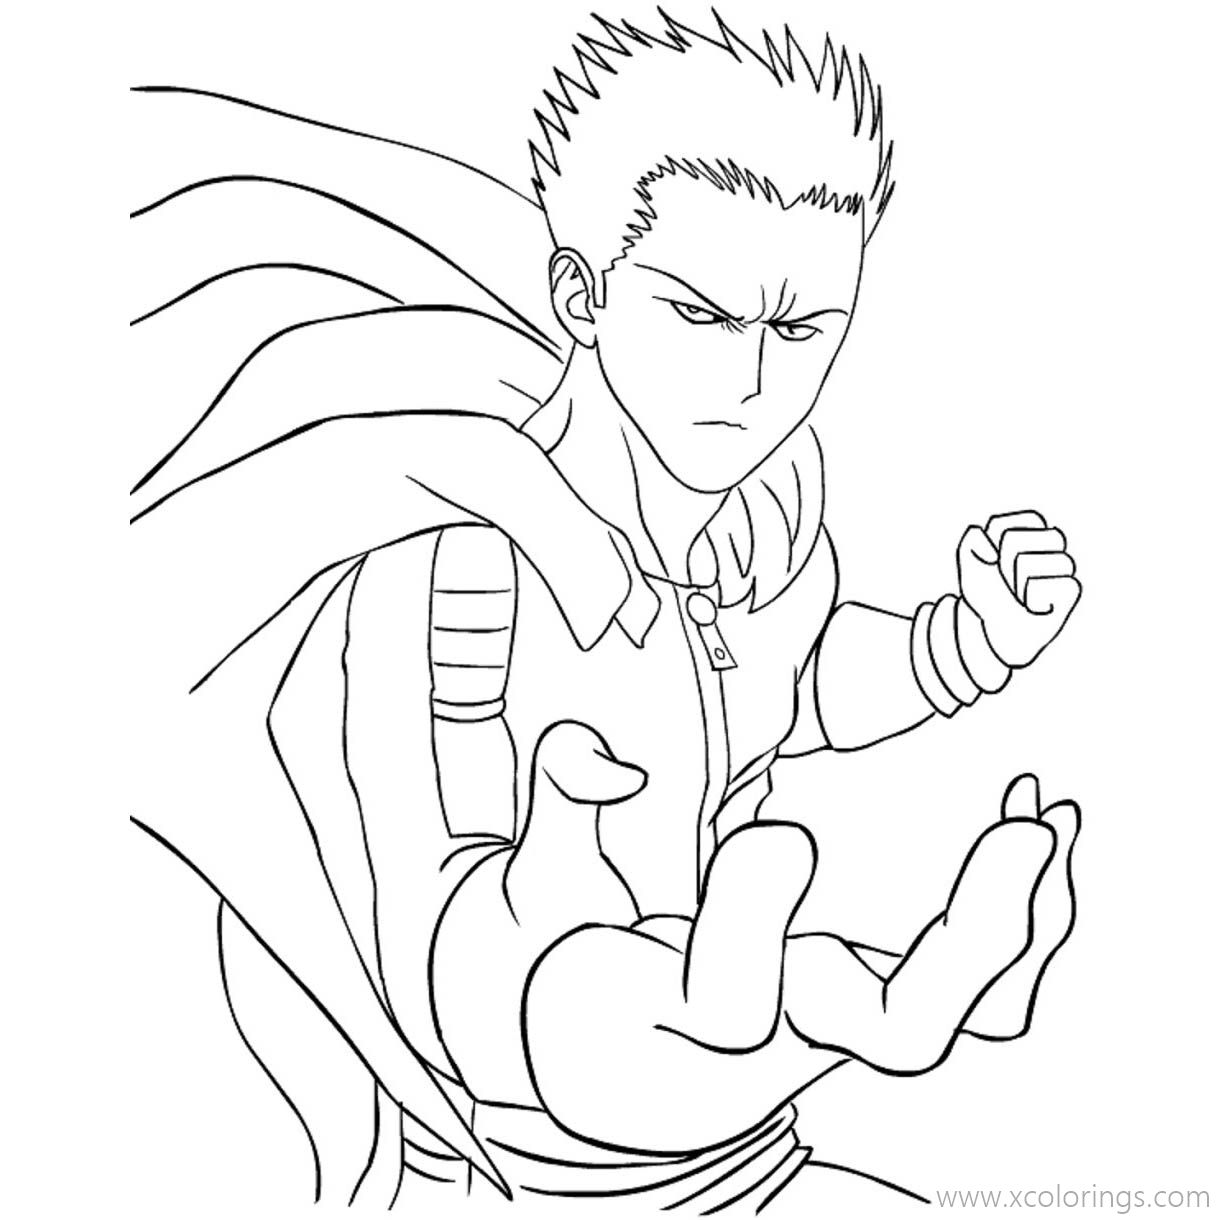 Free One Punch Man Coloring Pages Blast printable